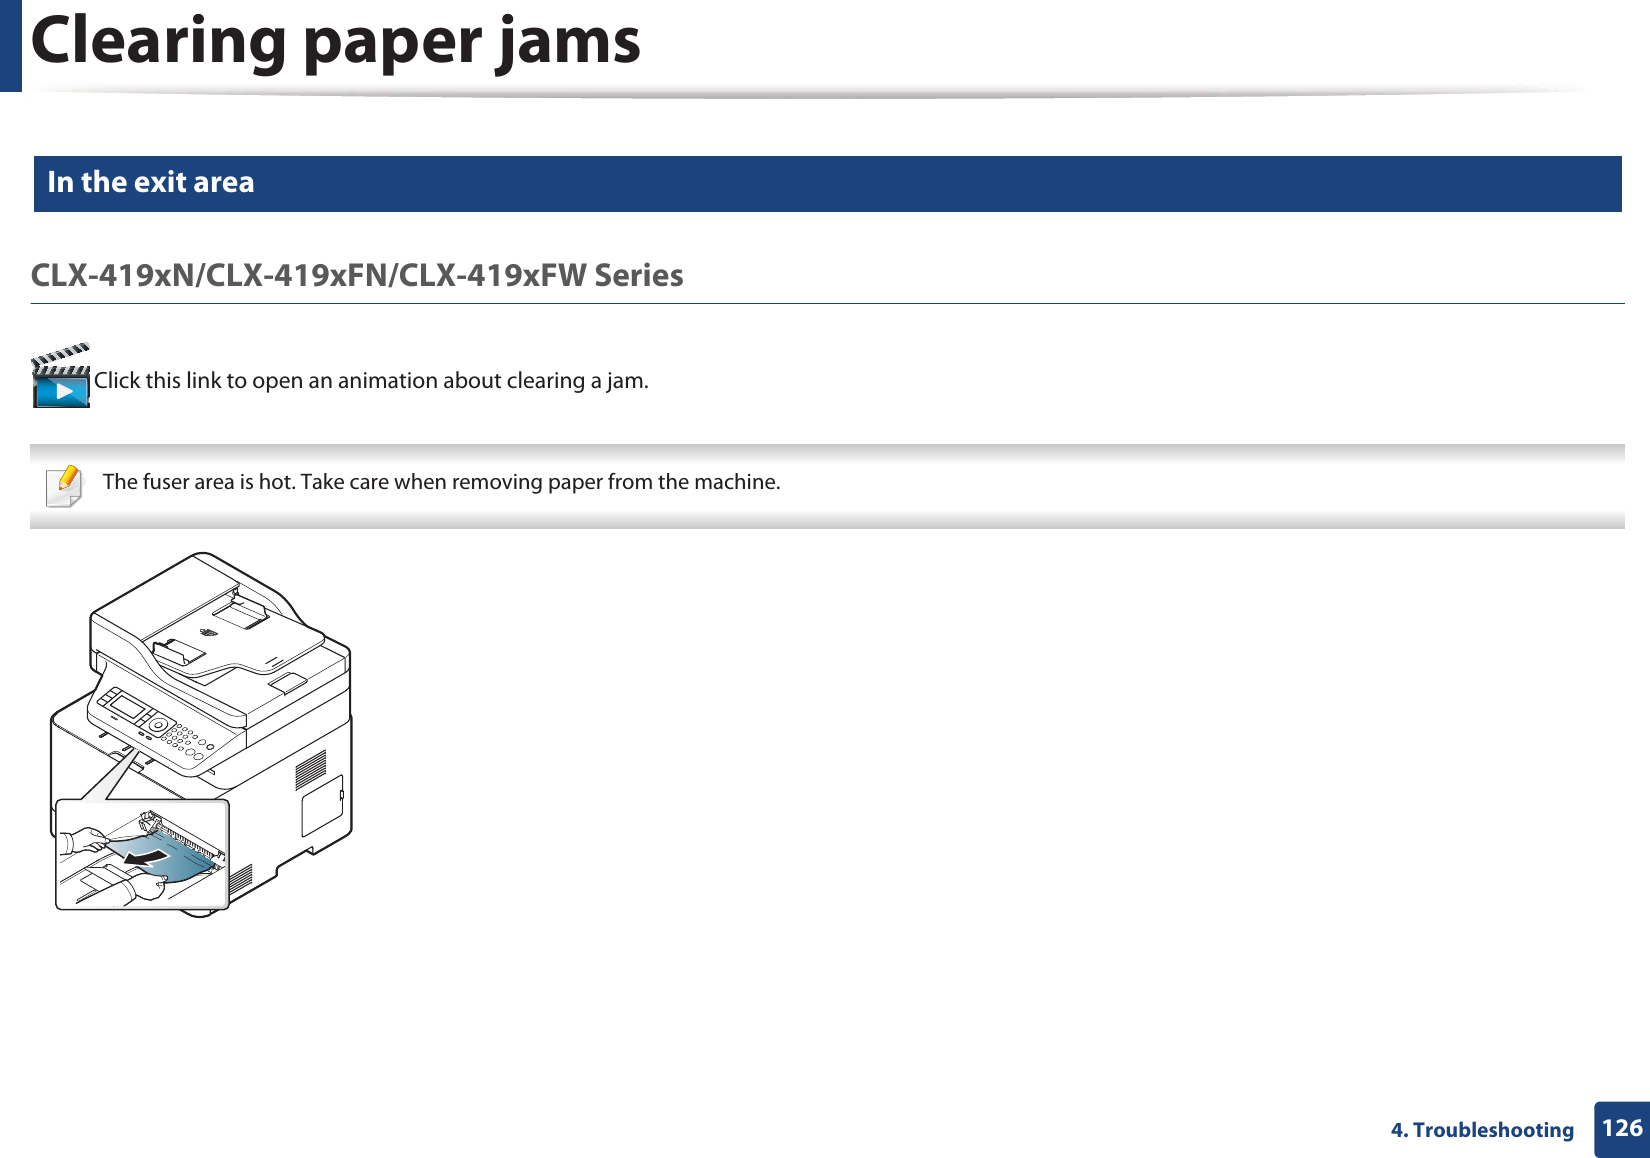 Clearing paper jams1264. Troubleshooting9 In the exit areaCLX-419xN/CLX-419xFN/CLX-419xFW Series Click this link to open an animation about clearing a jam. The fuser area is hot. Take care when removing paper from the machine. 